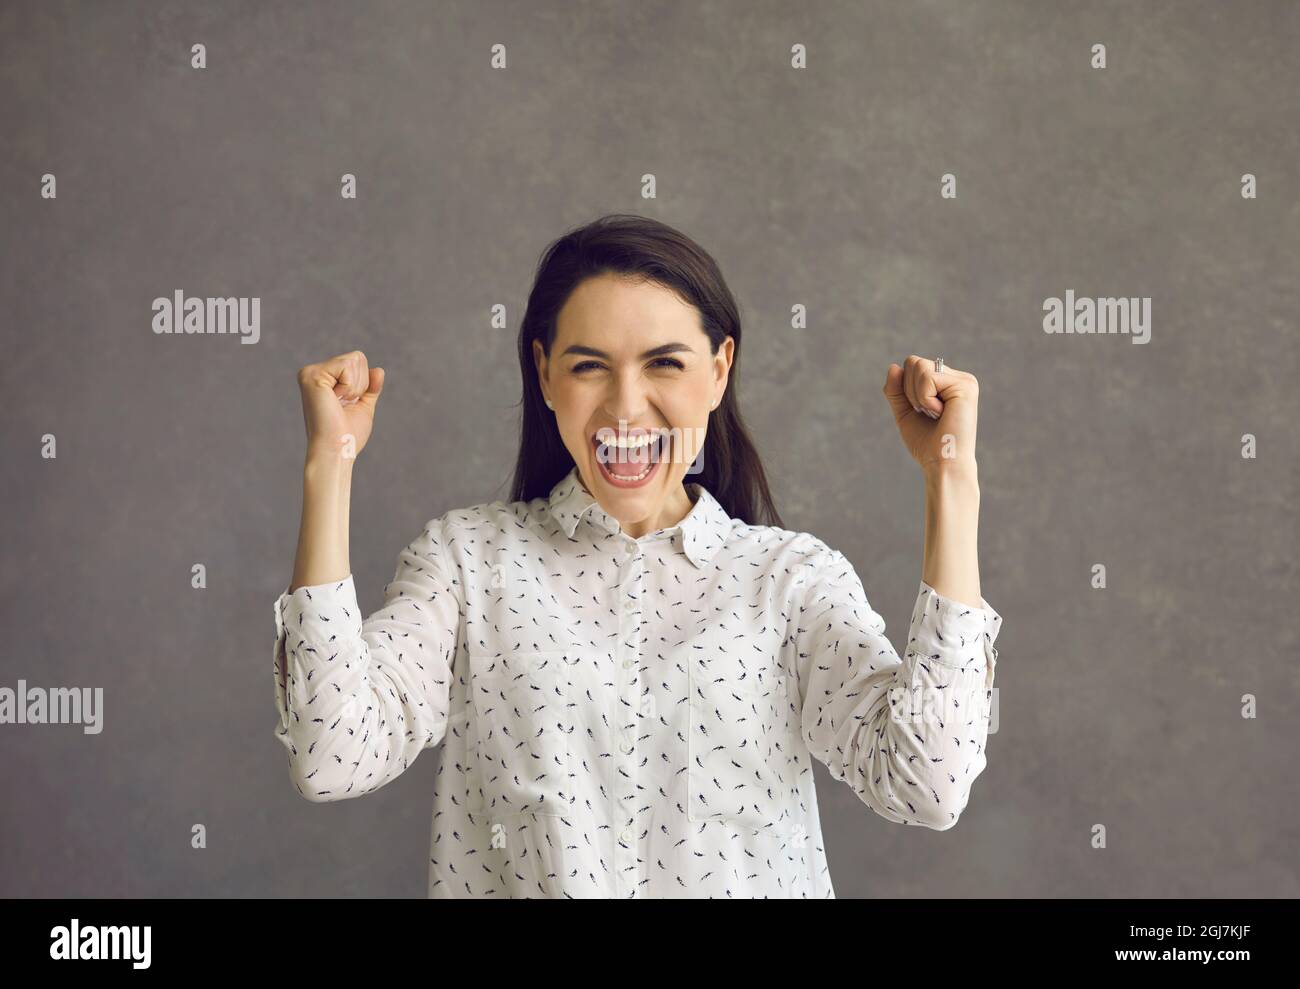 Success, happiness or winning the lottery concept. Stock Photo